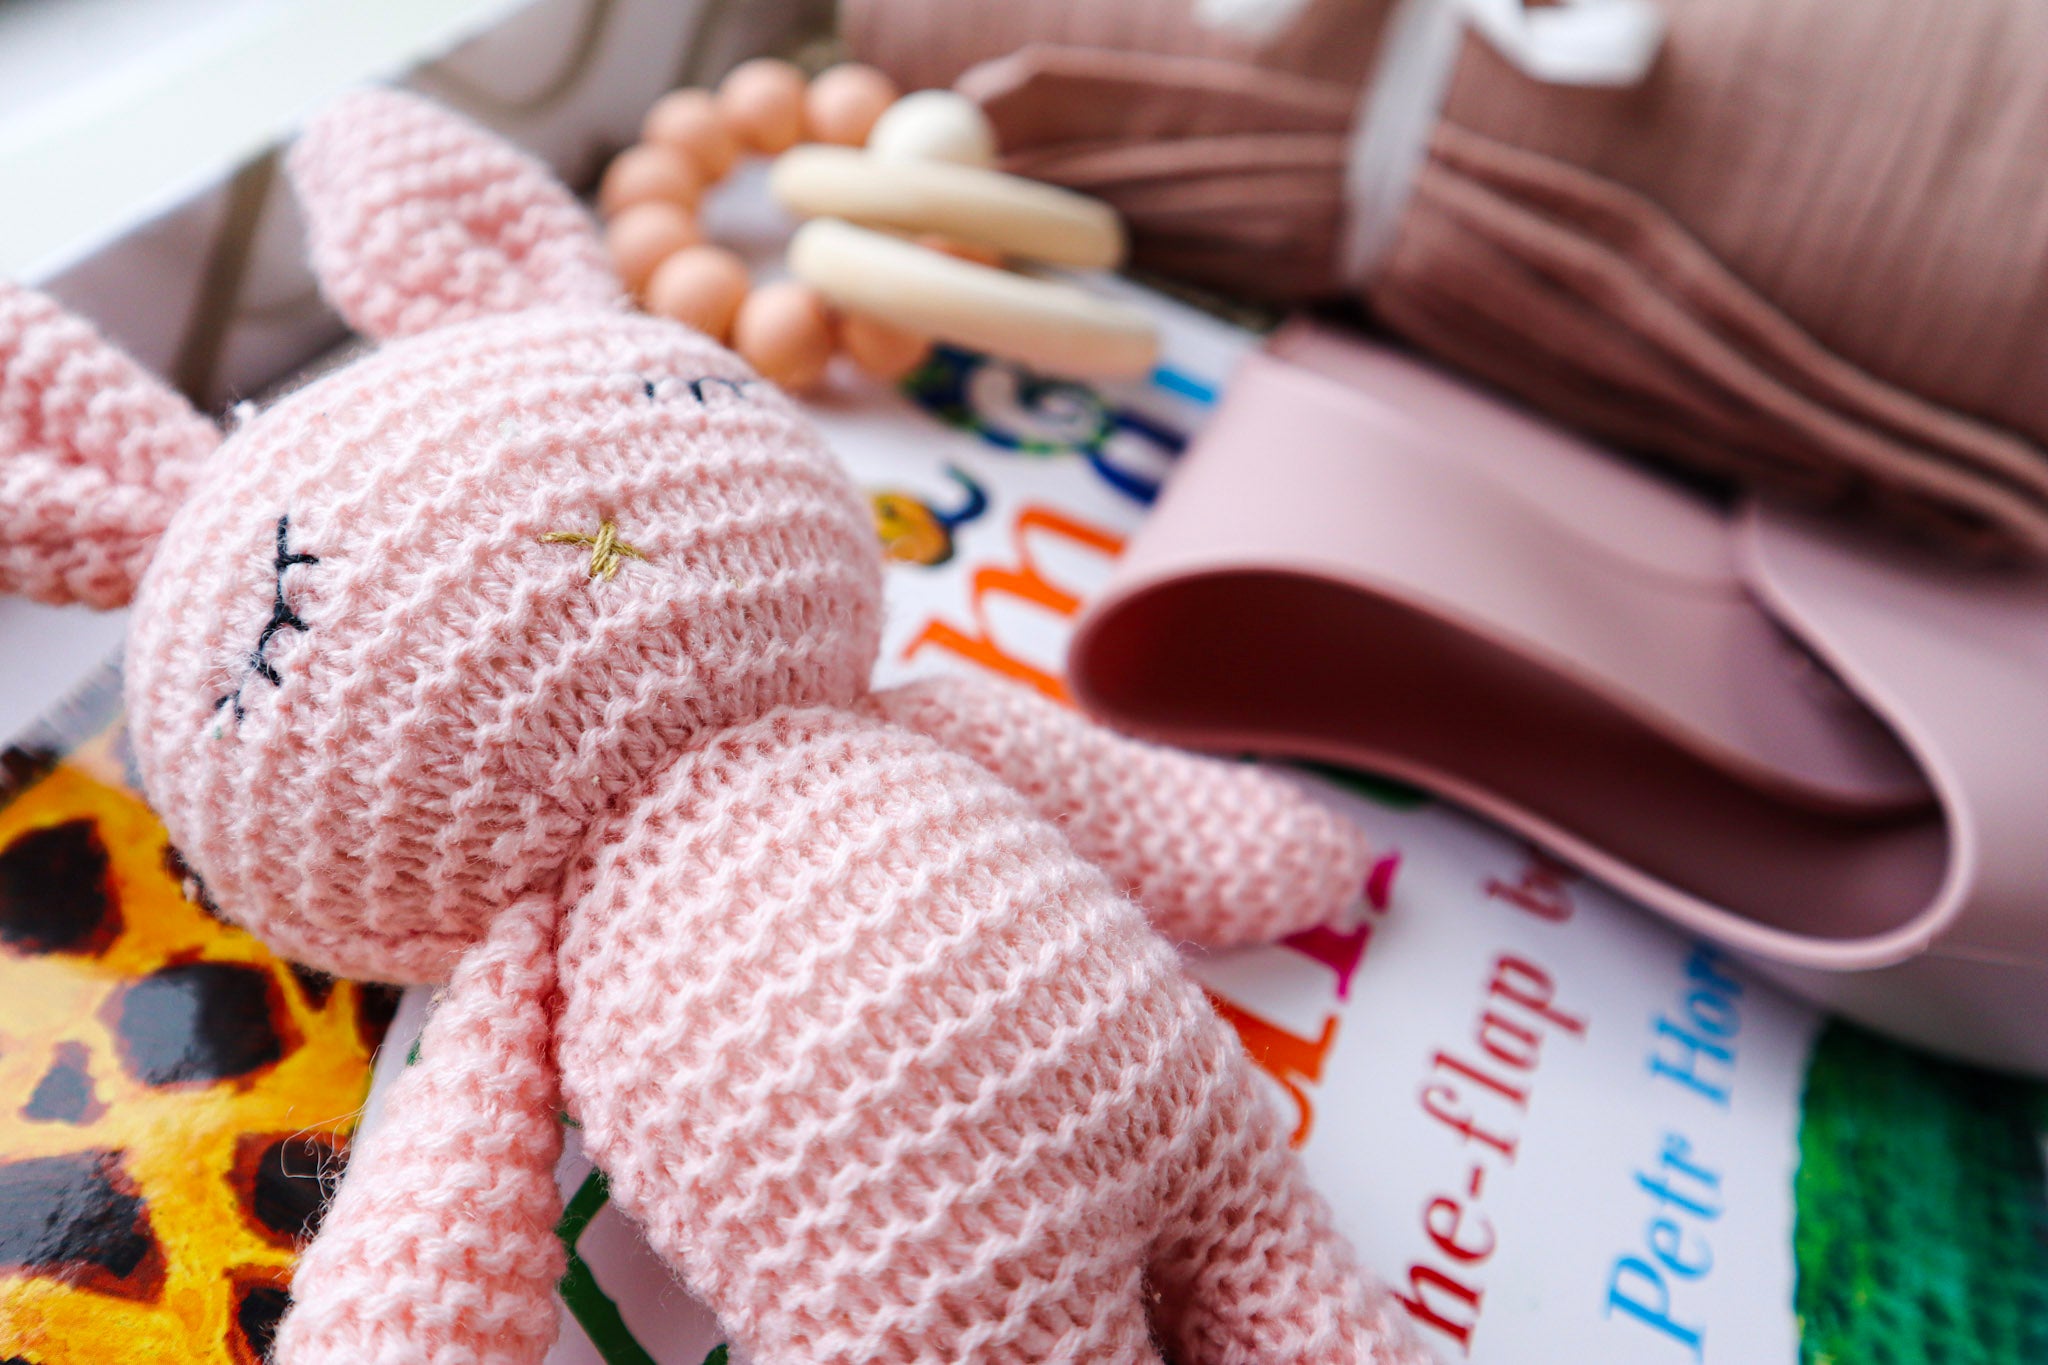 A soft pink crocheted, sleeping bunny toy lying on a children's hardcover book titled Animal Counting